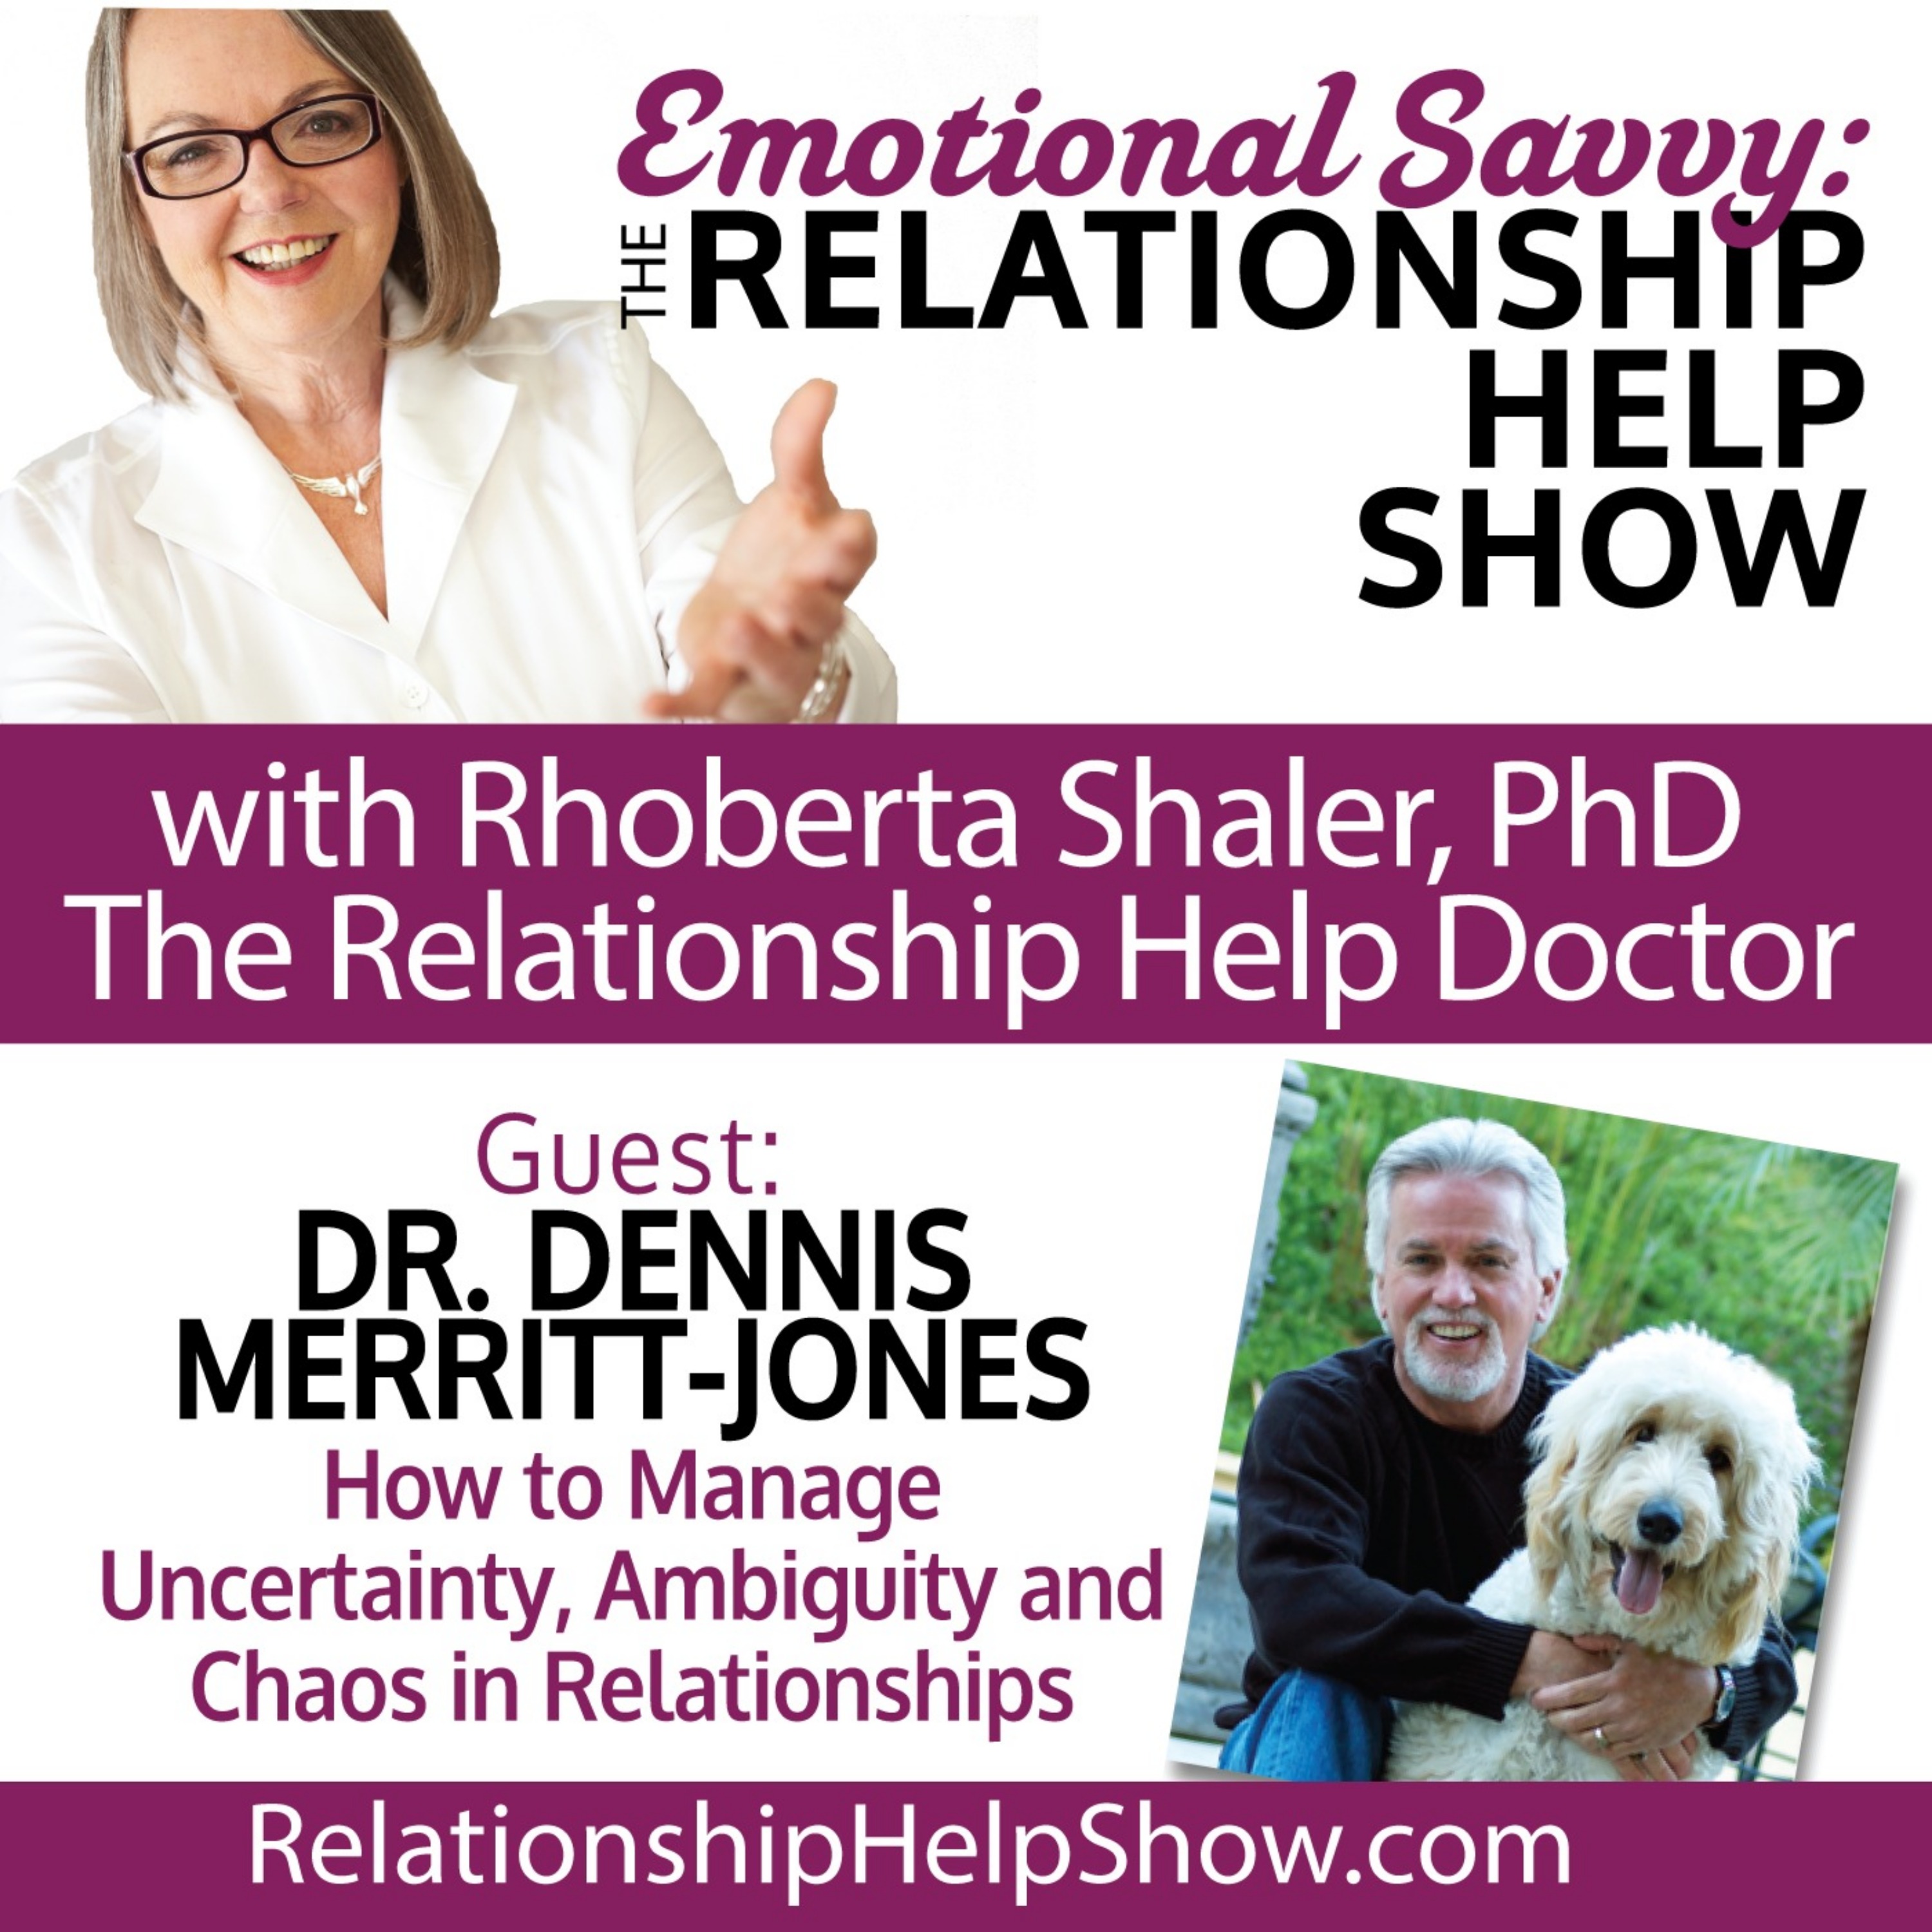 How to Manage Uncertainty, Ambiguity and Chaos in Relationships  GUEST: Dr. Dennis Merritt-Jones